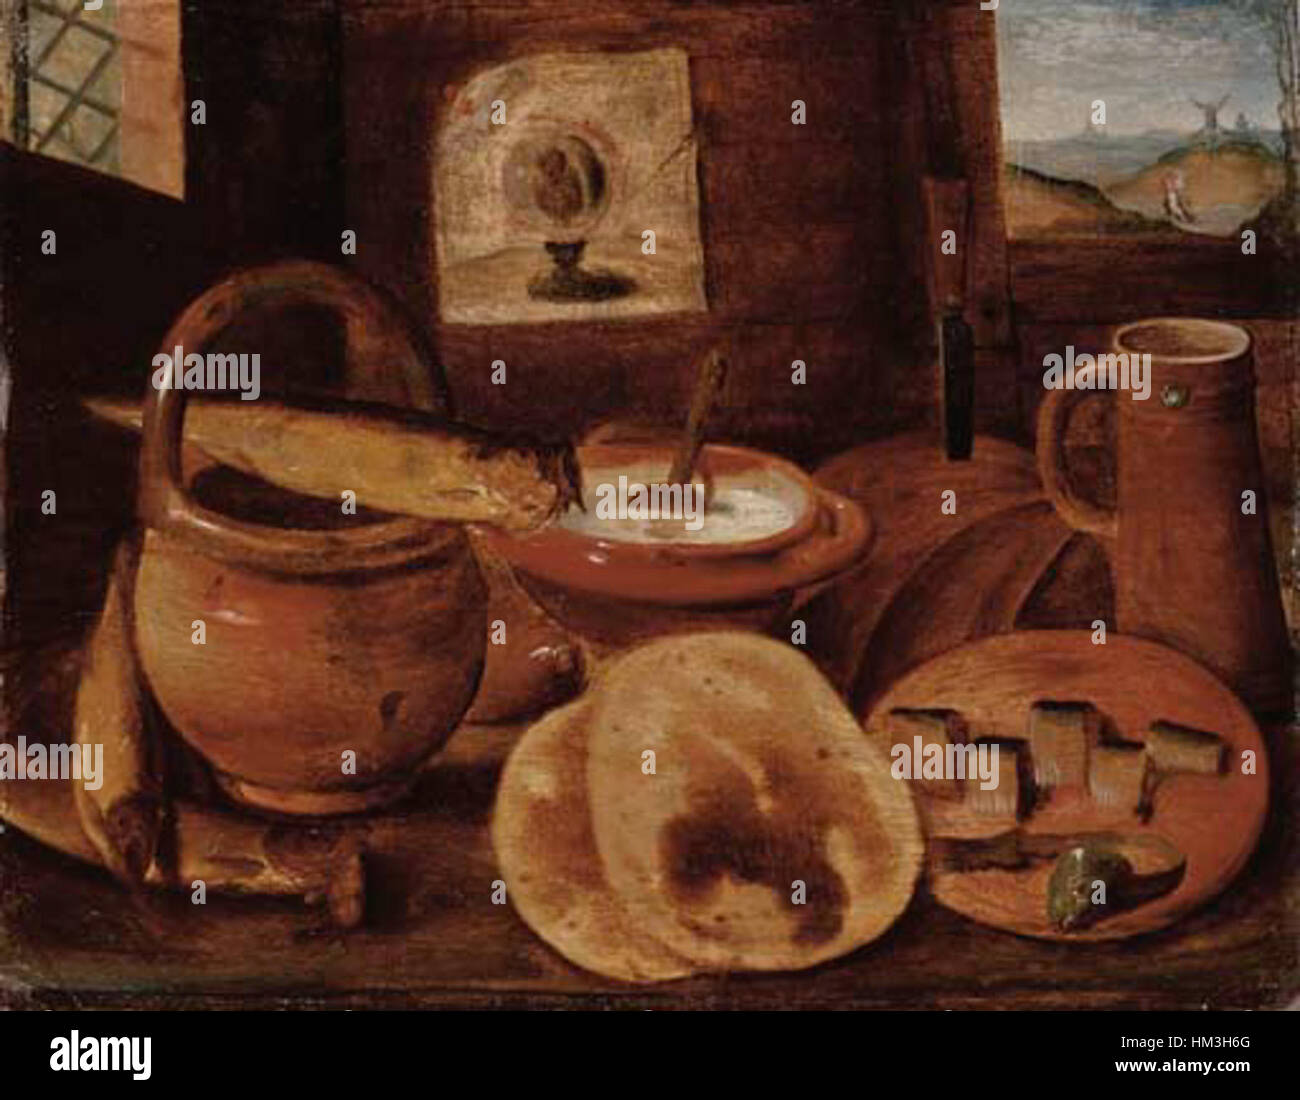 Hieronymus Francken (II) - A poor man's meal, a loaf of bread, porridge, buns and a herring on a wooden table Stock Photo